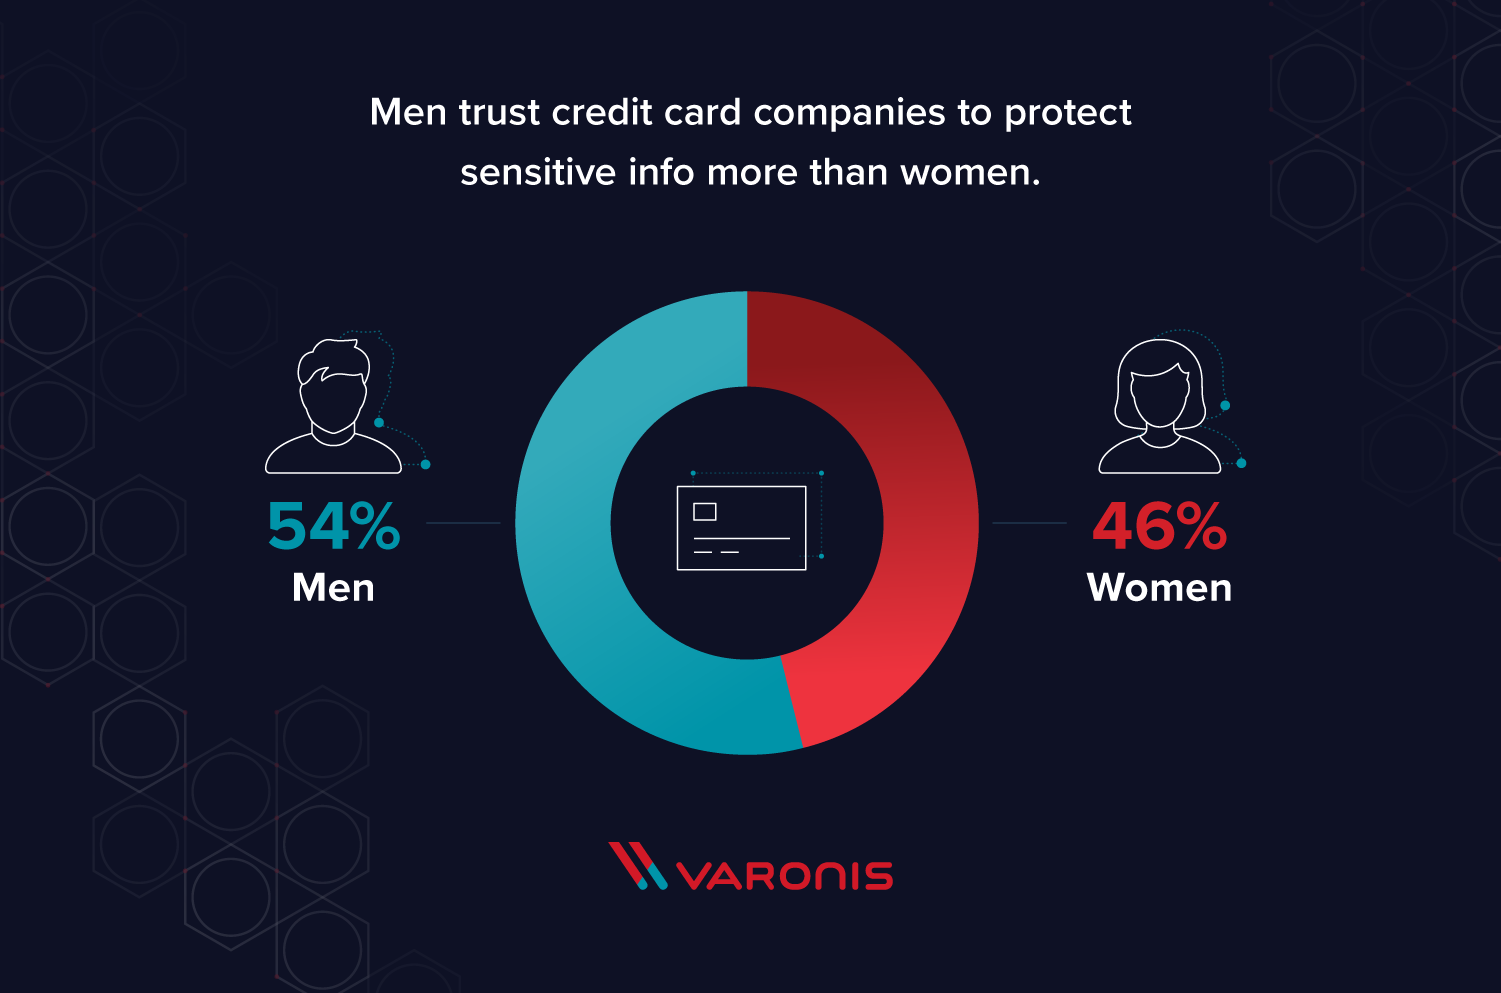 men trust credit card companies with their personal information more than women